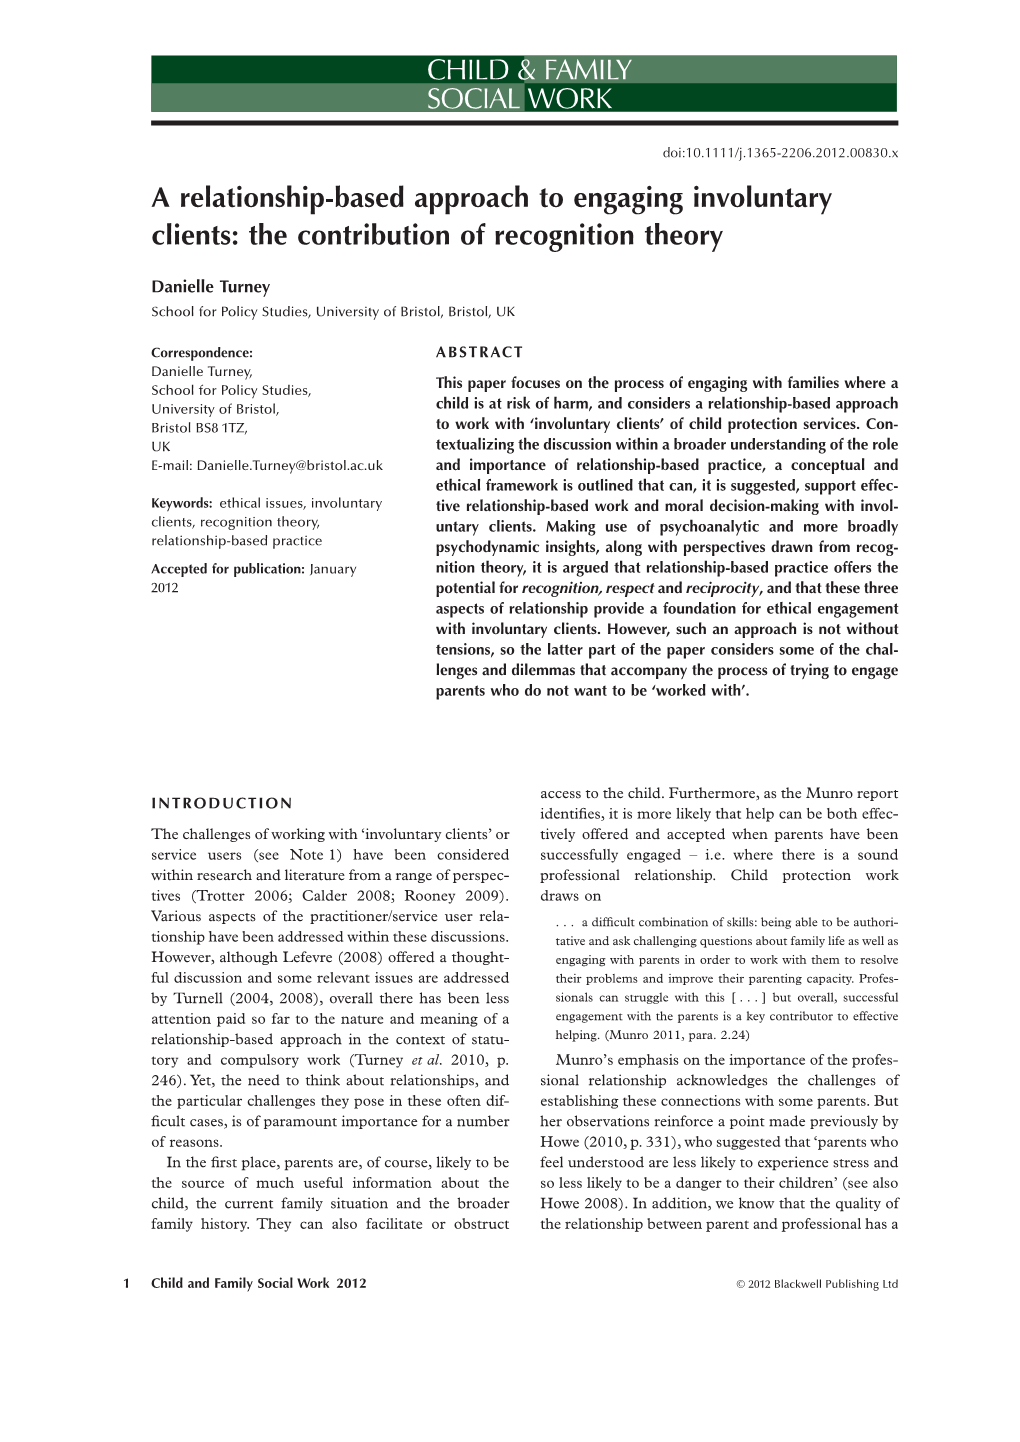 A Relationship-Based Approach to Engaging Involuntary Clients: the Contribution of Recognition Theorycfs 830 1..11